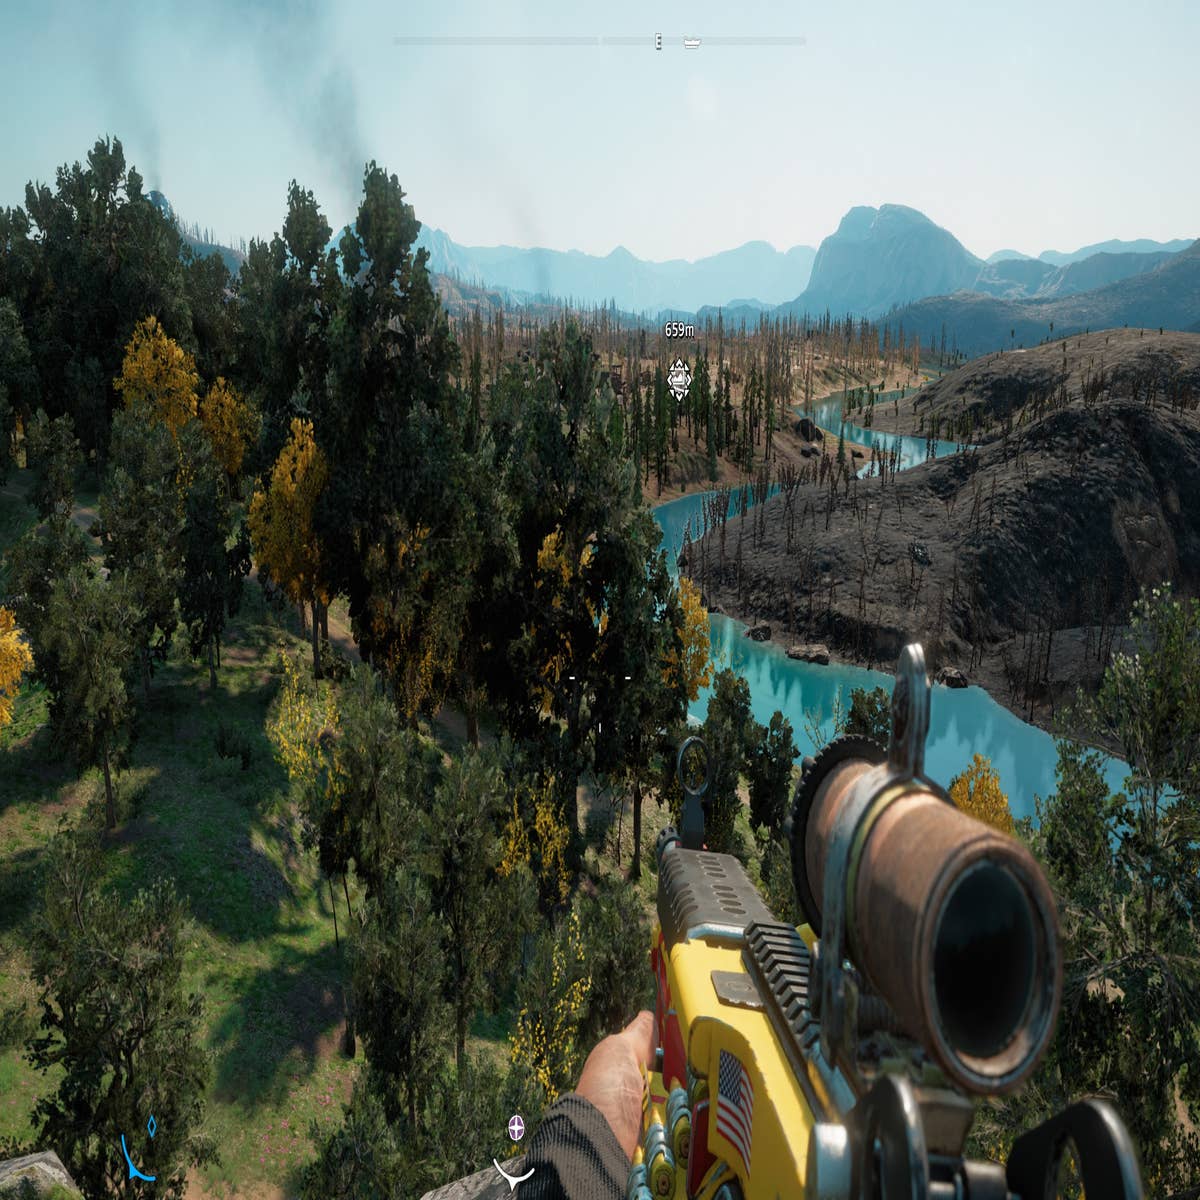 Far Cry 5 review: A wild open-world adventure - CNET